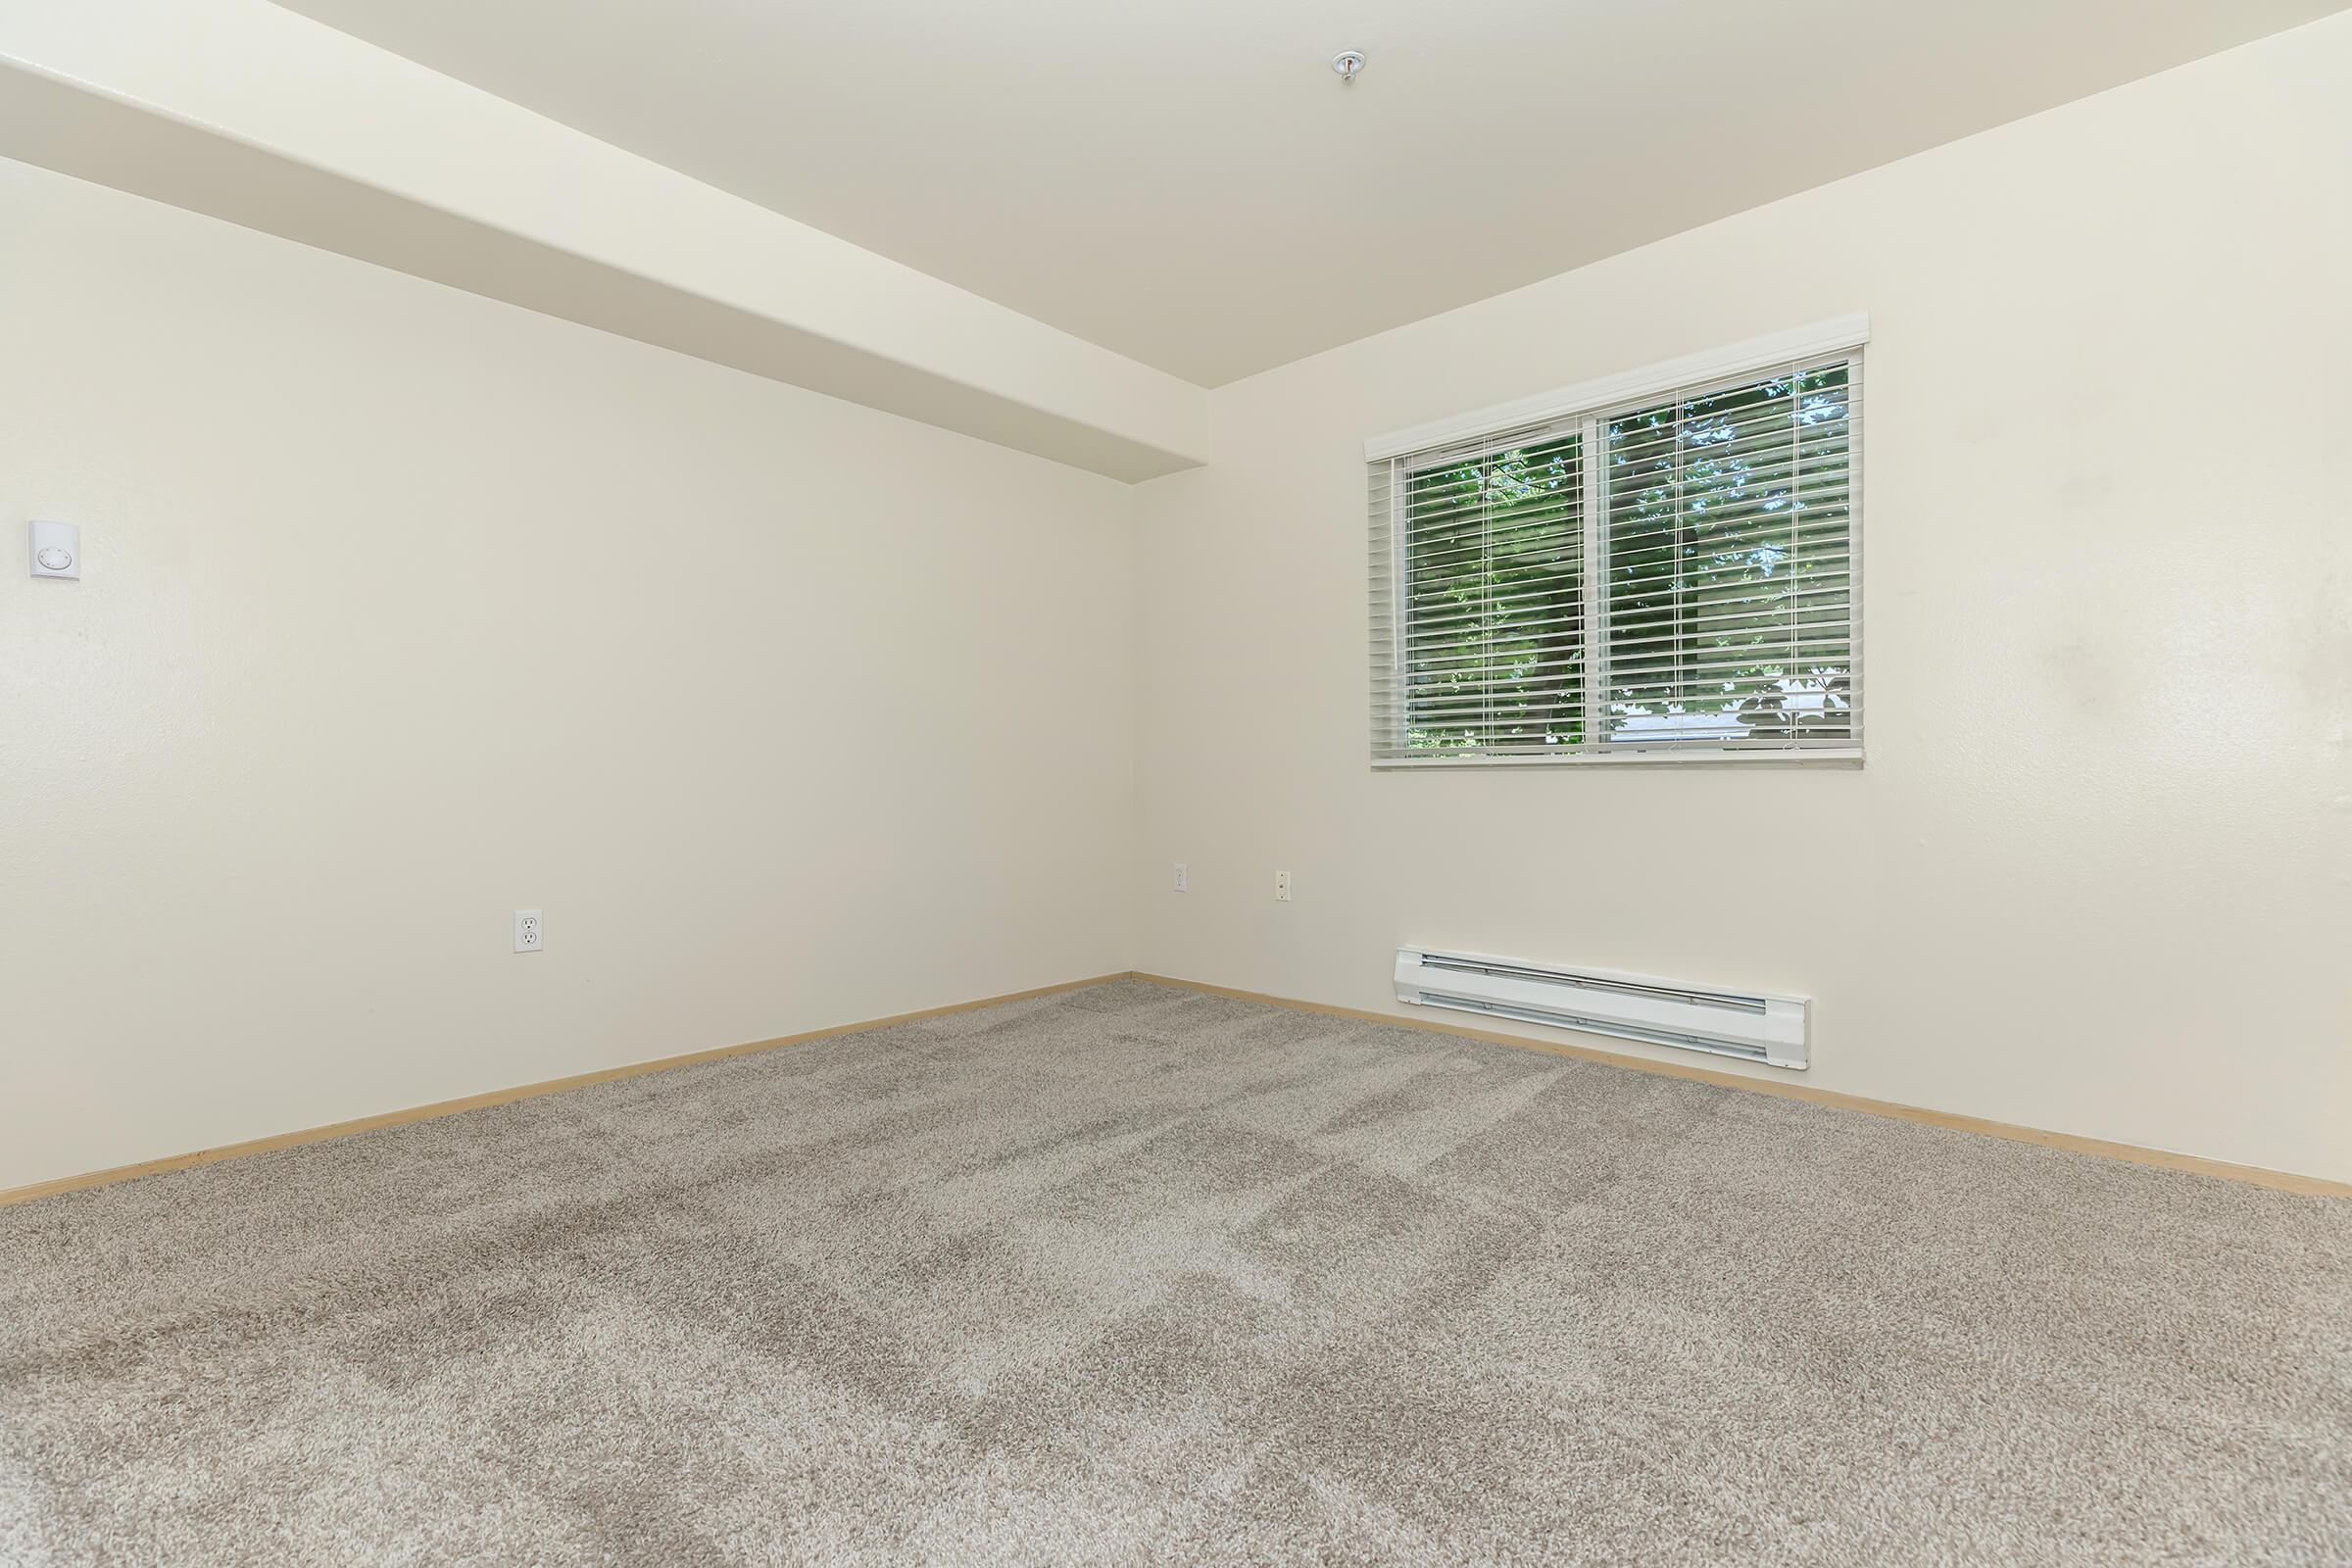 WINDOW BLINDS AND CARPETED FLOORS INCLUDED